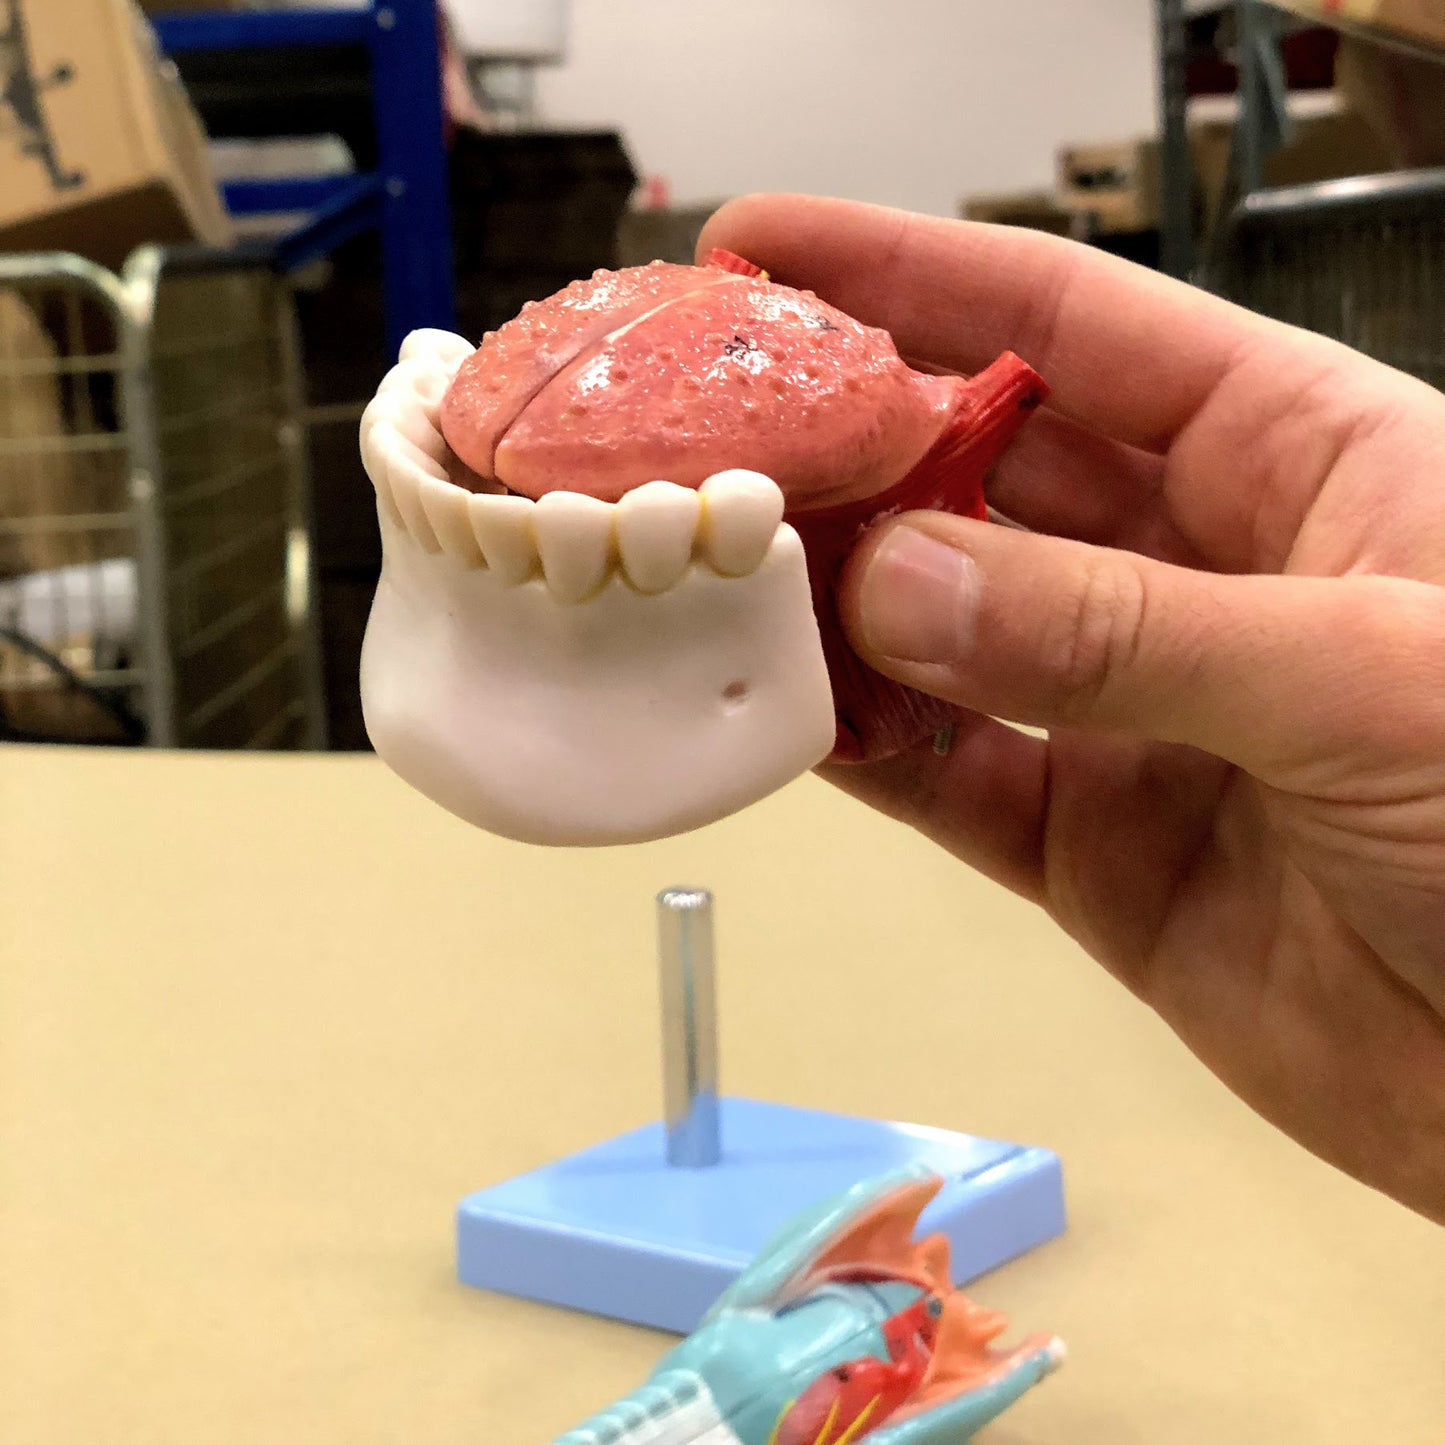 Larynx model with vocal folds and several other tissues. Can be separated into 5 parts